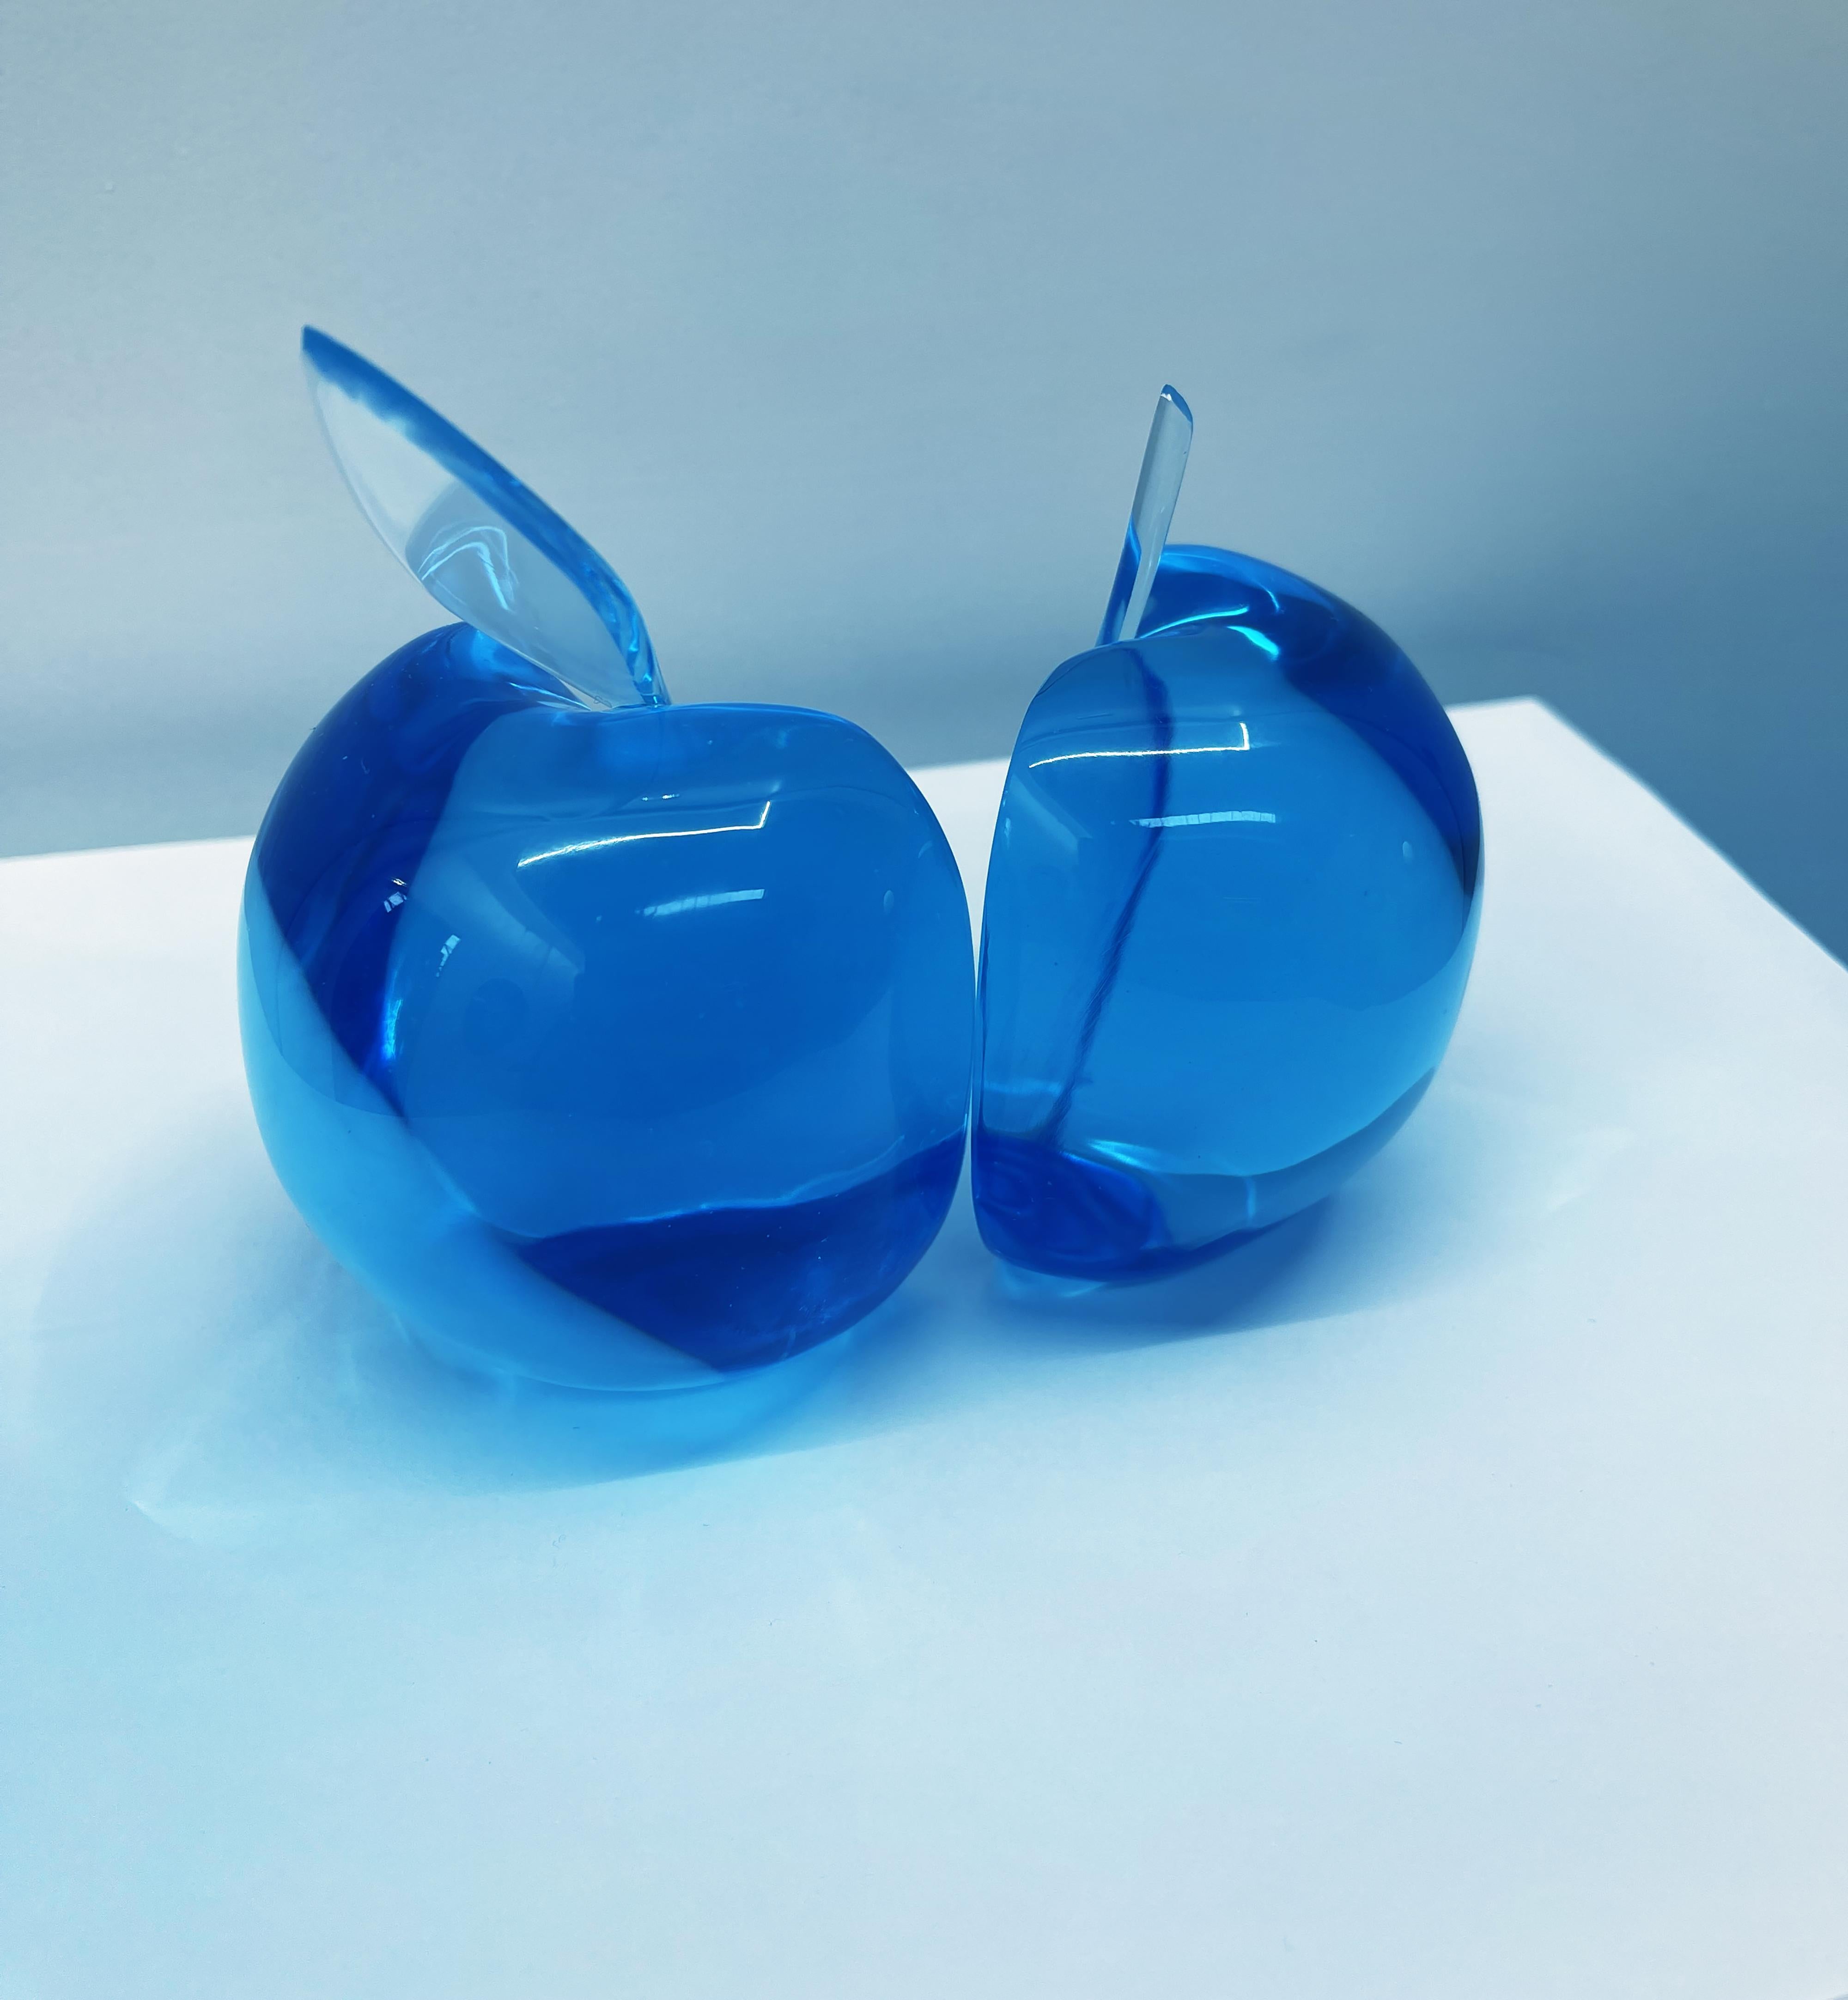 Hand-Crafted Contemporary 'Apple' Sculpture Blue Crystal Handcrafted in Italy by Ghirò Studio For Sale